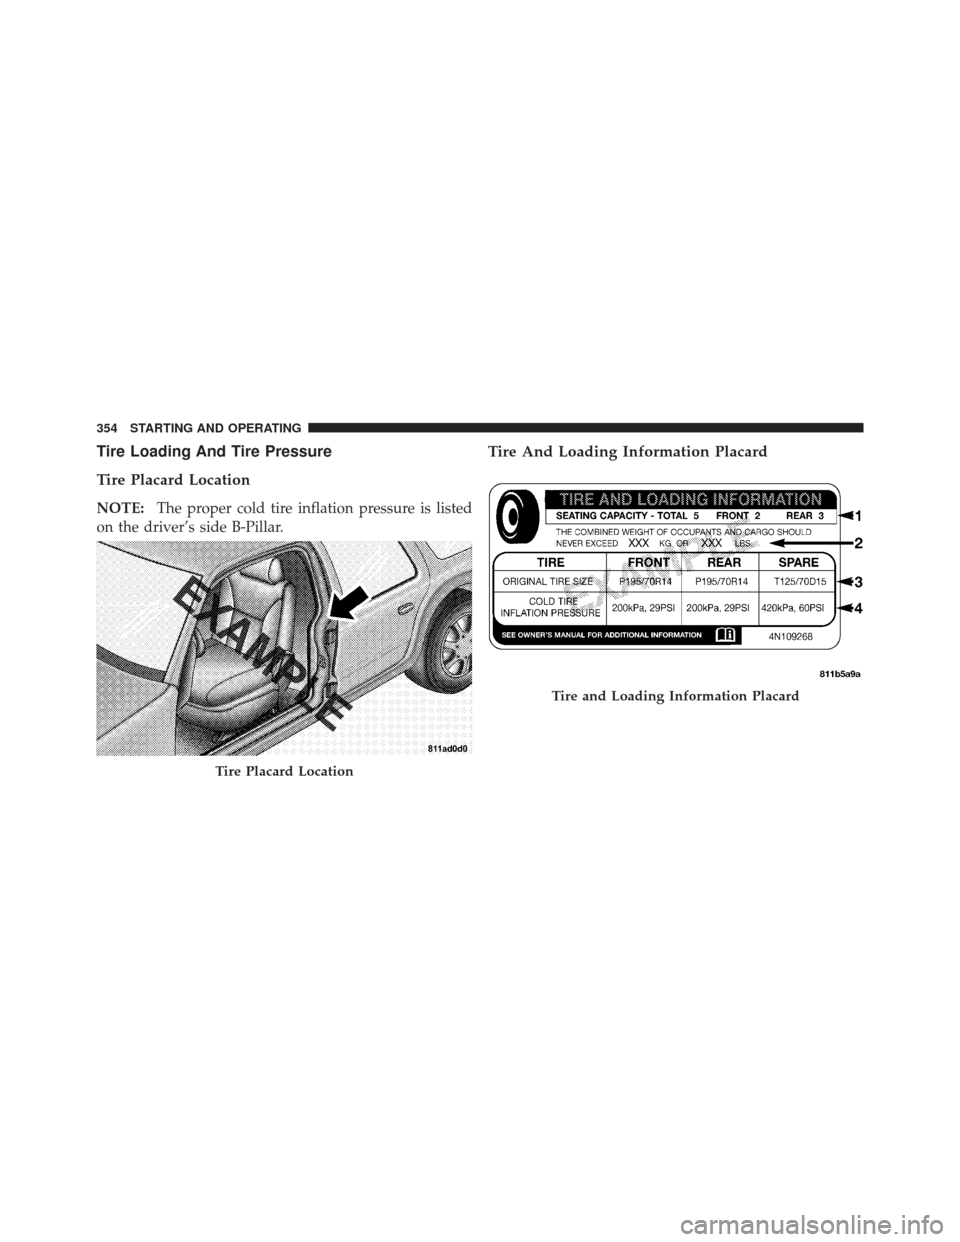 CHRYSLER 300 2011 2.G Owners Manual Tire Loading And Tire Pressure
Tire Placard Location
NOTE:The proper cold tire inflation pressure is listed
on the driver’s side B-Pillar.
Tire And Loading Information Placard
Tire Placard Location
